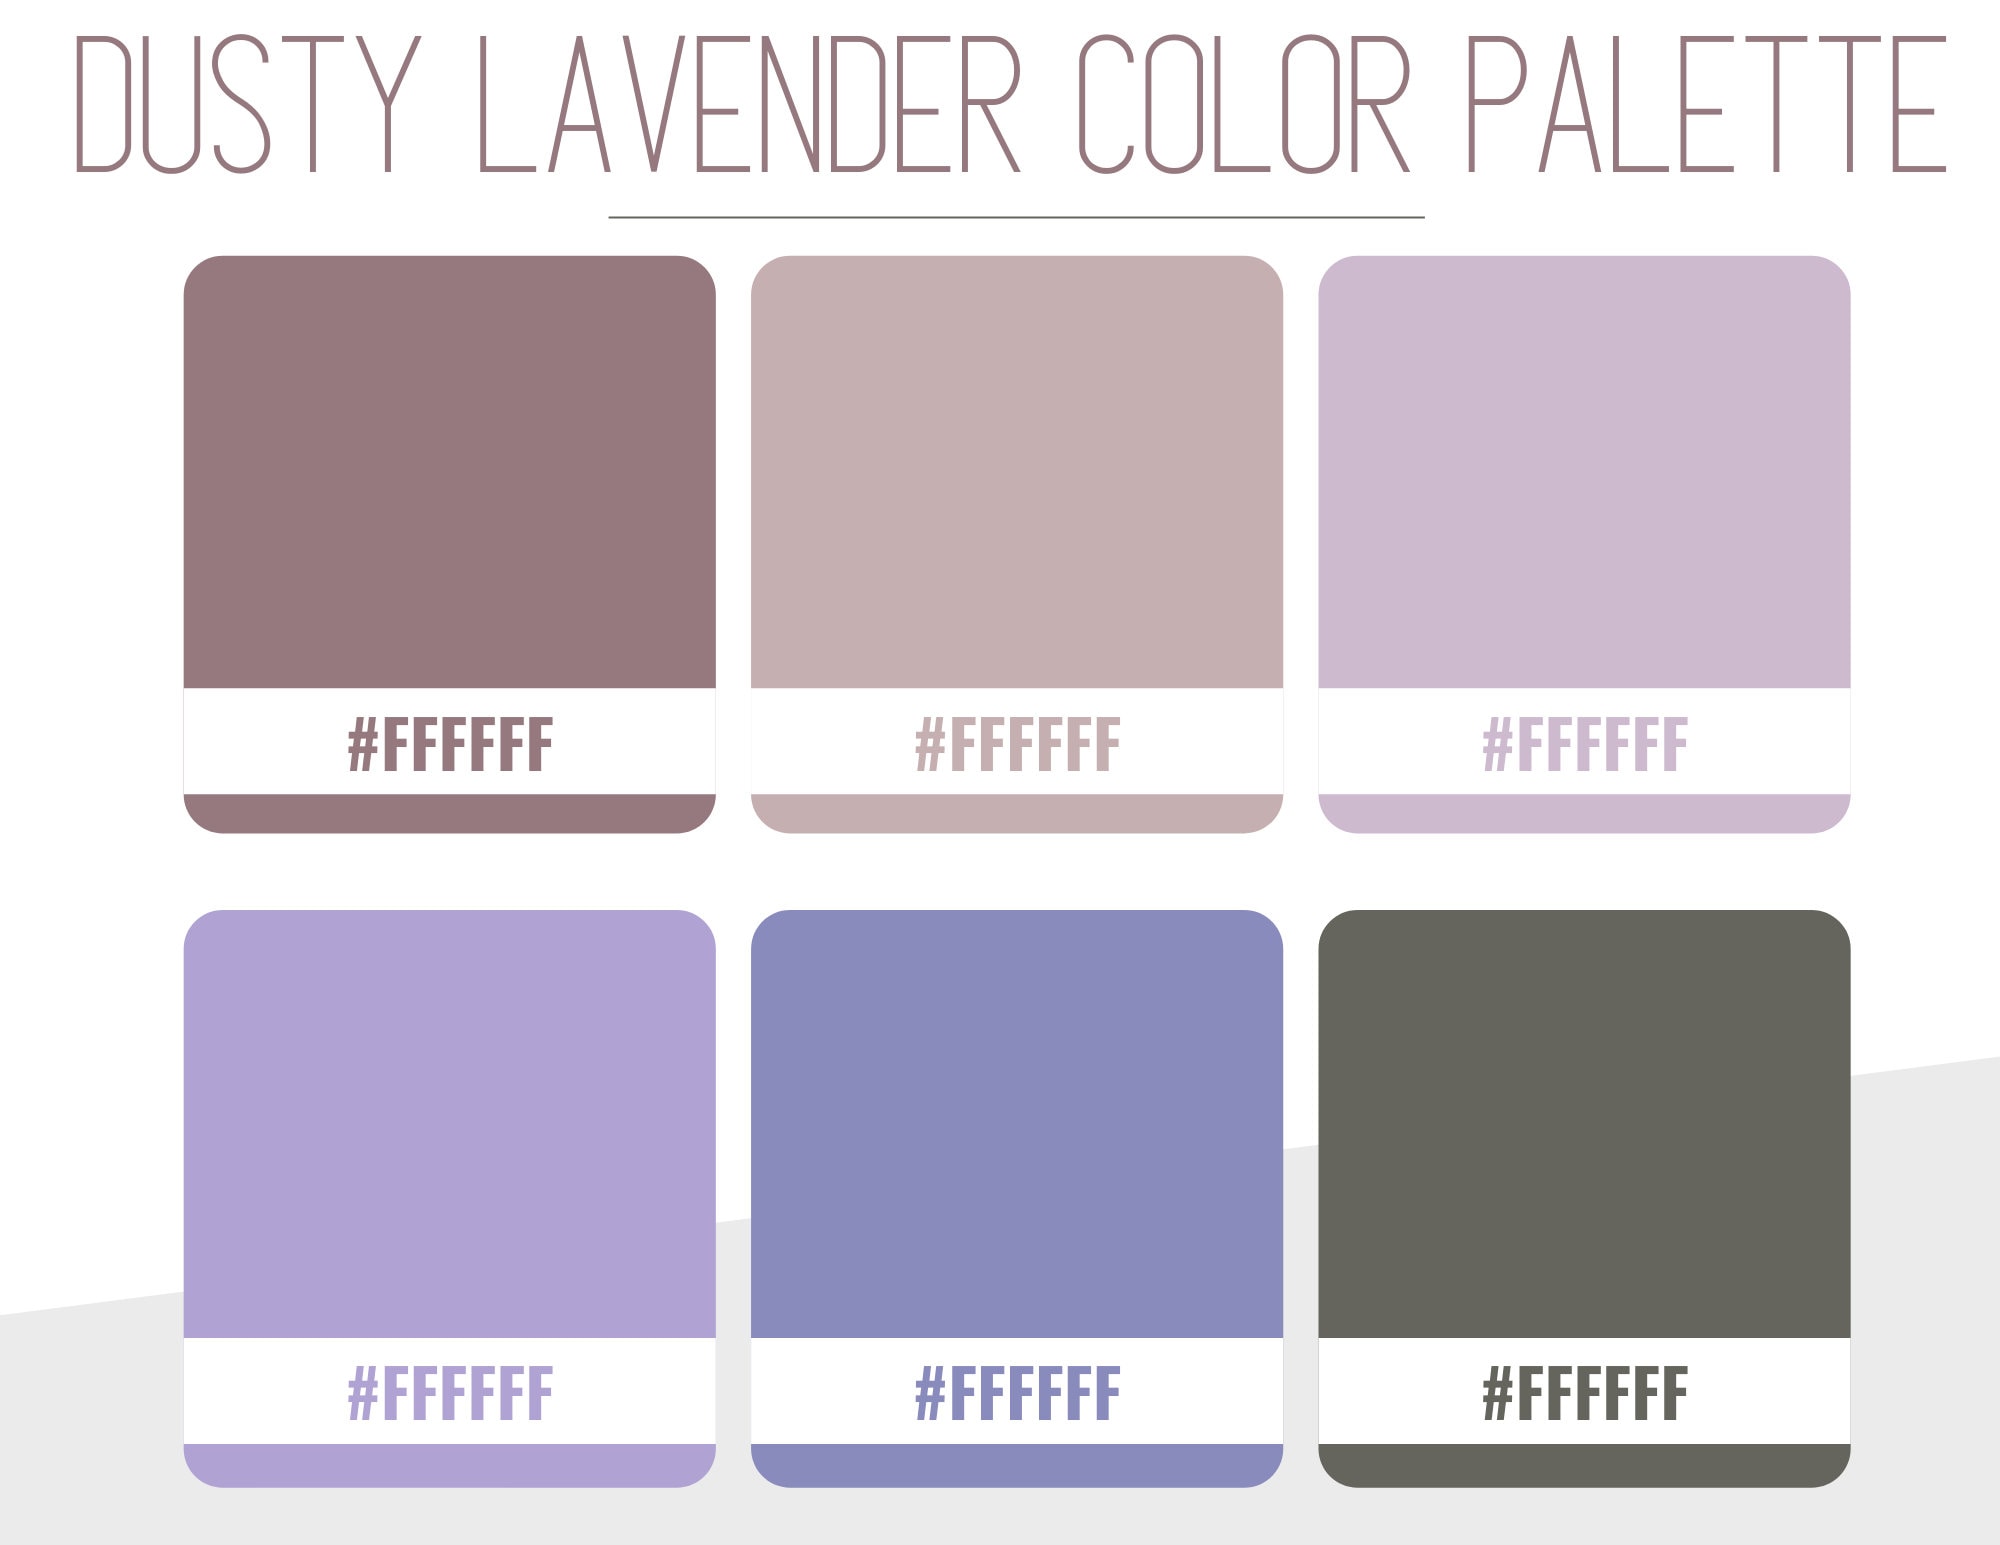 8. "Soft pastel shades, like lavender or baby blue, can add a pop of color without being too distracting" - wide 6